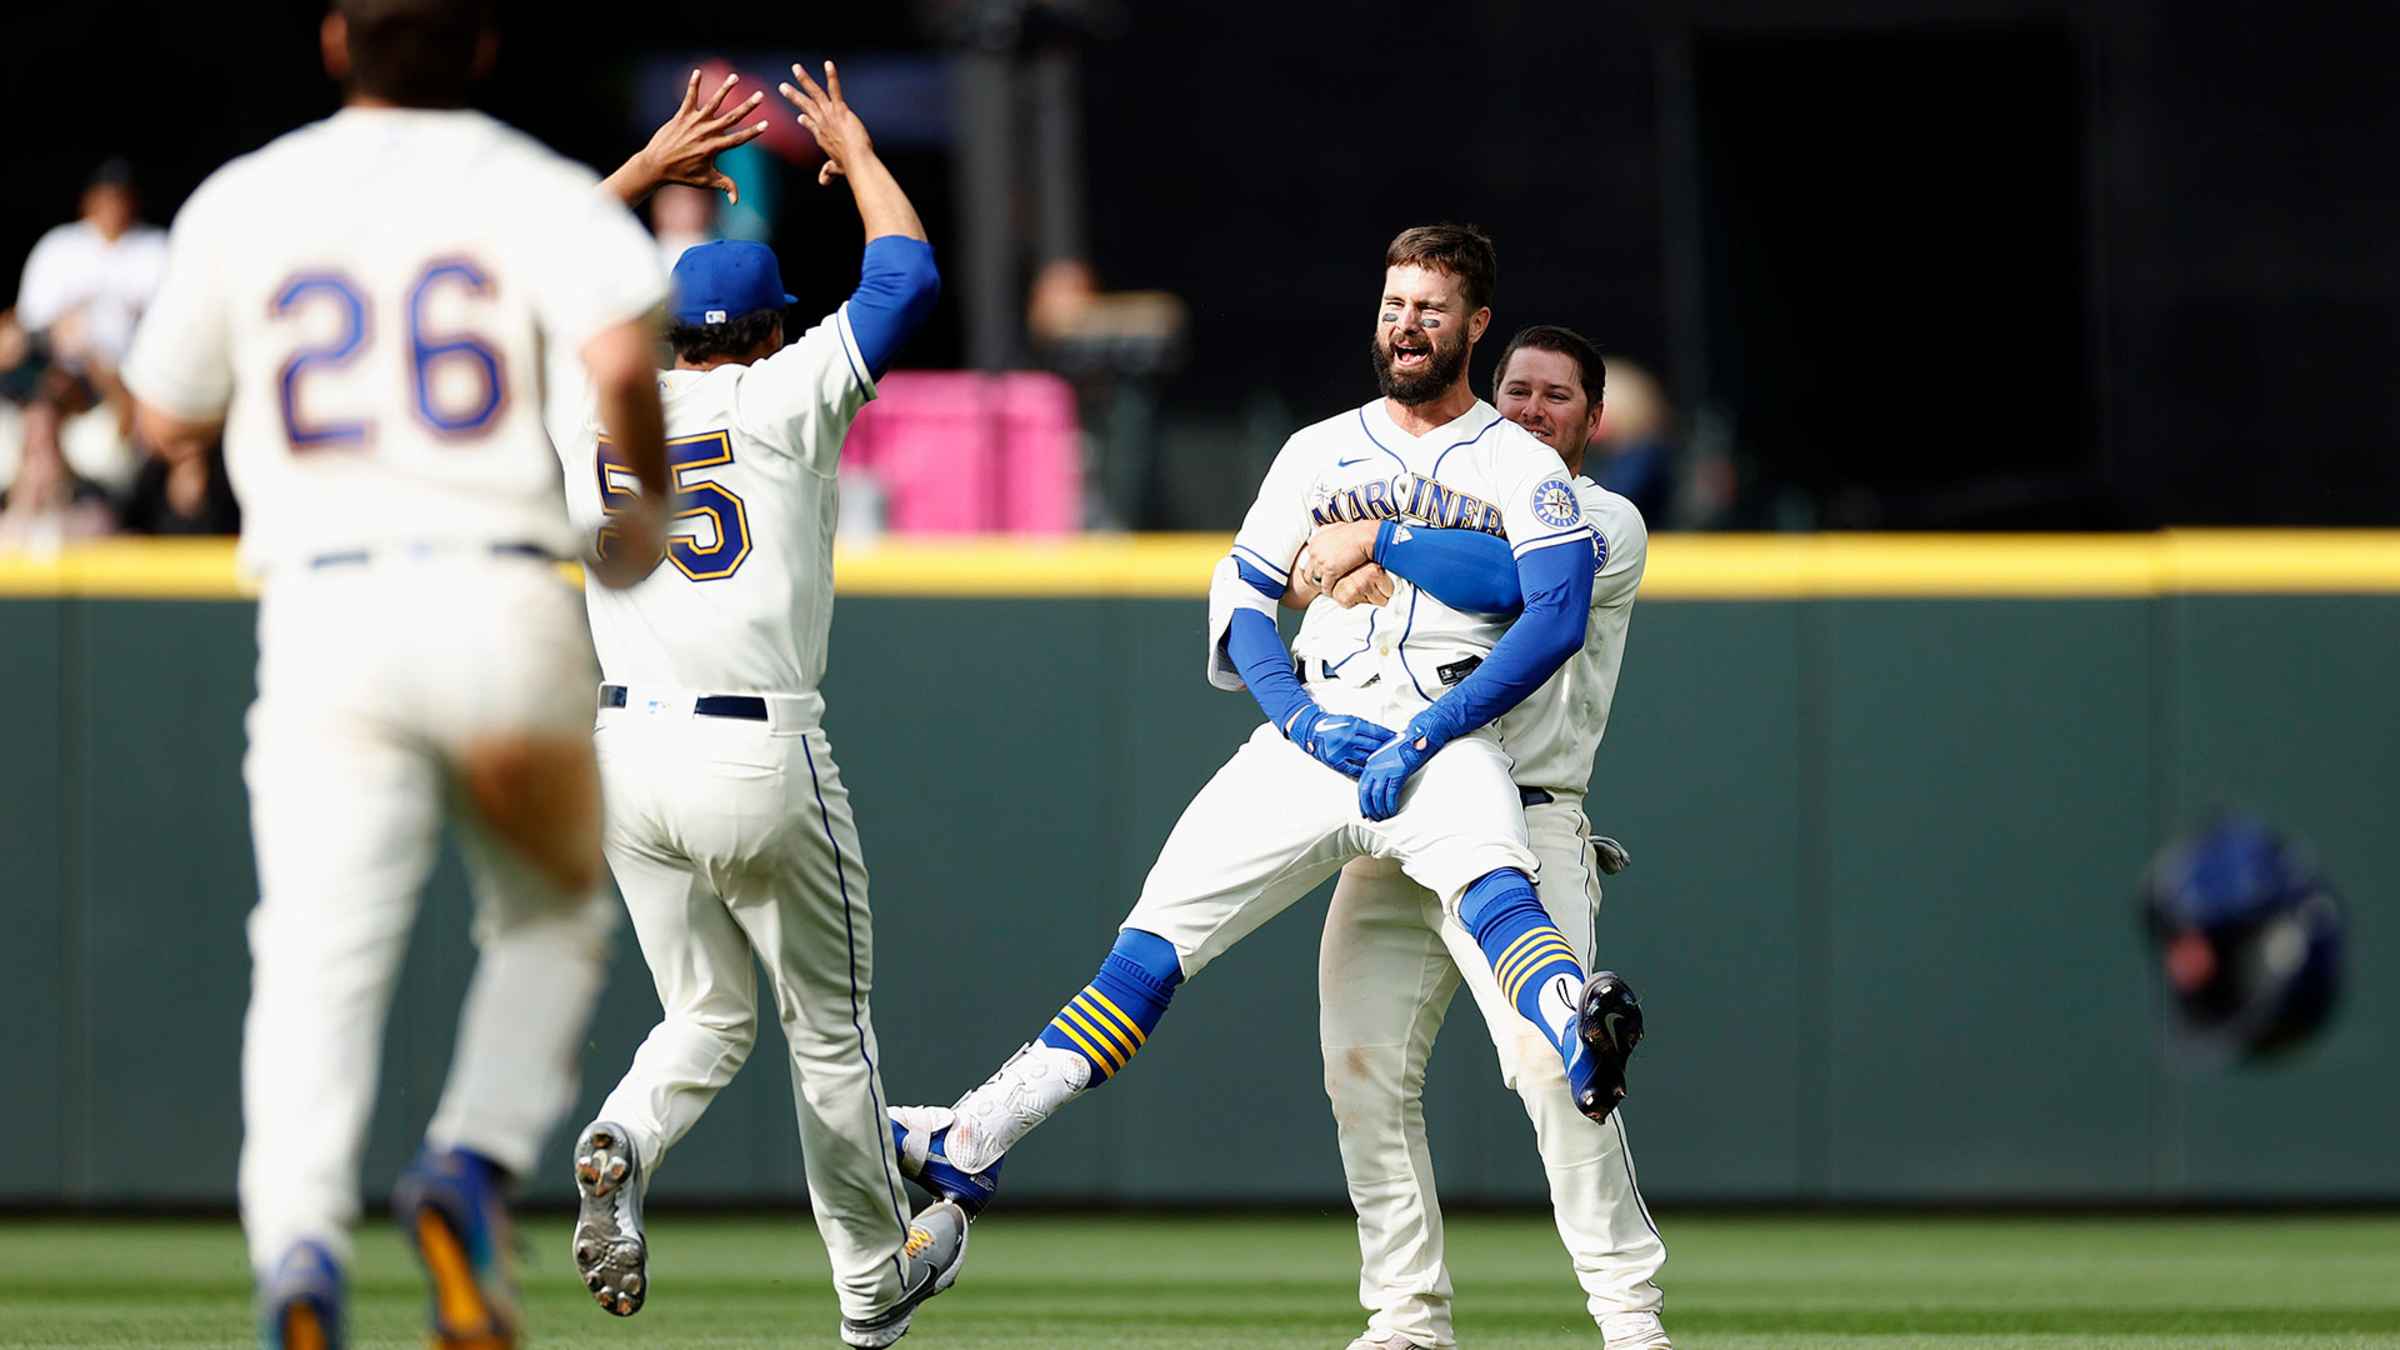 Jesse Winker wins it in 12th inning, Mariners complete homestand with sweep  of Royals